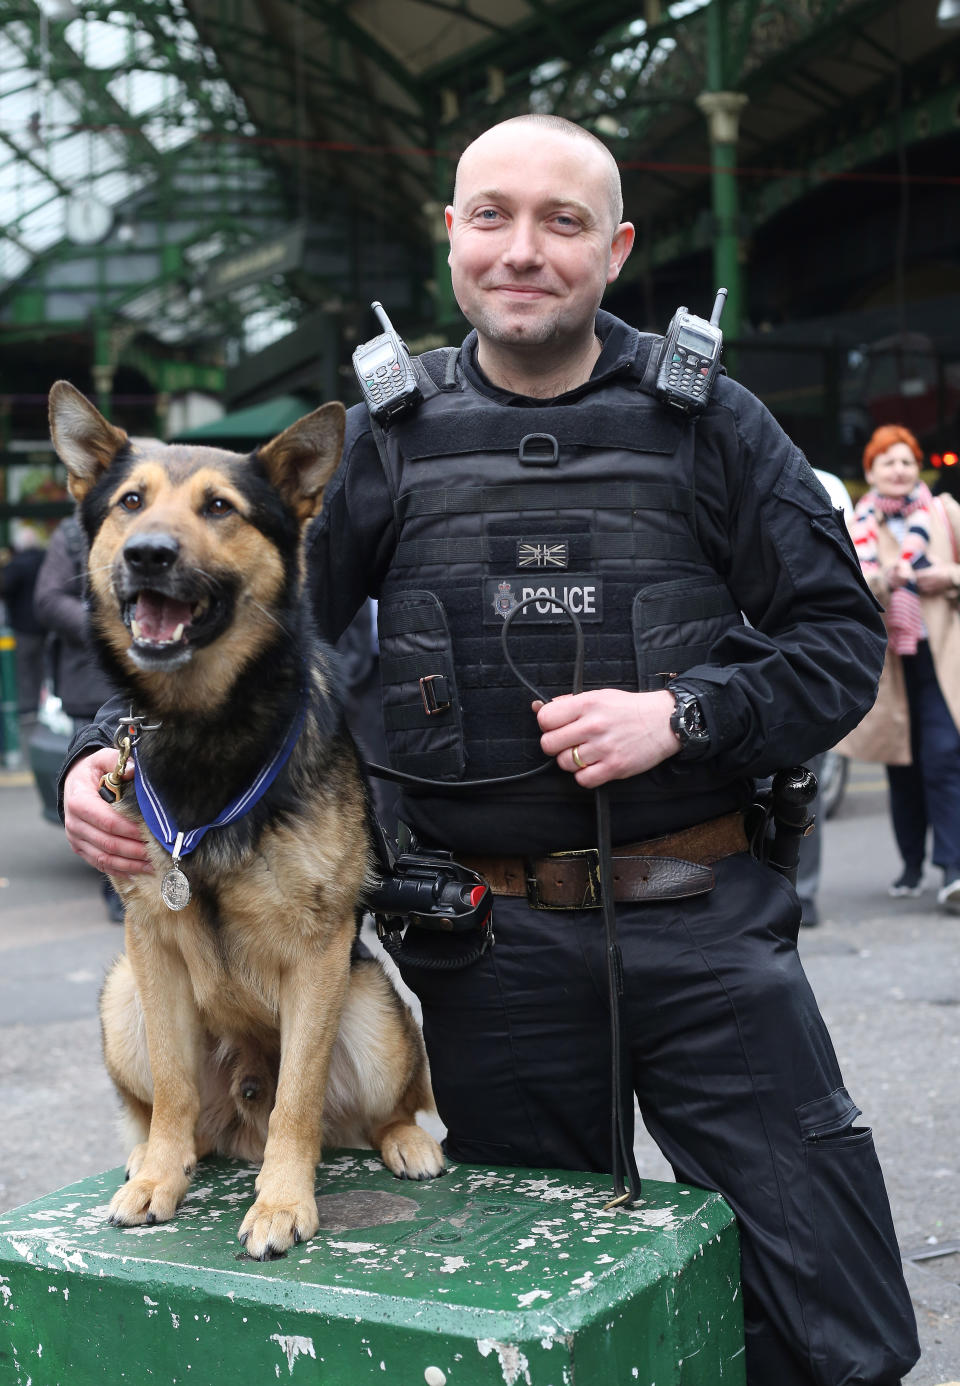 PD Marci, General Purpose Dog, with handler PC Neil Billany receives the PDSA Order of Merit, for terror attack heroics. He is one of seven hero police dogs receiving an award for helping emergency services during the 2017 London terror attacks at Westminster Bridge, London Bridge and Borough Market.